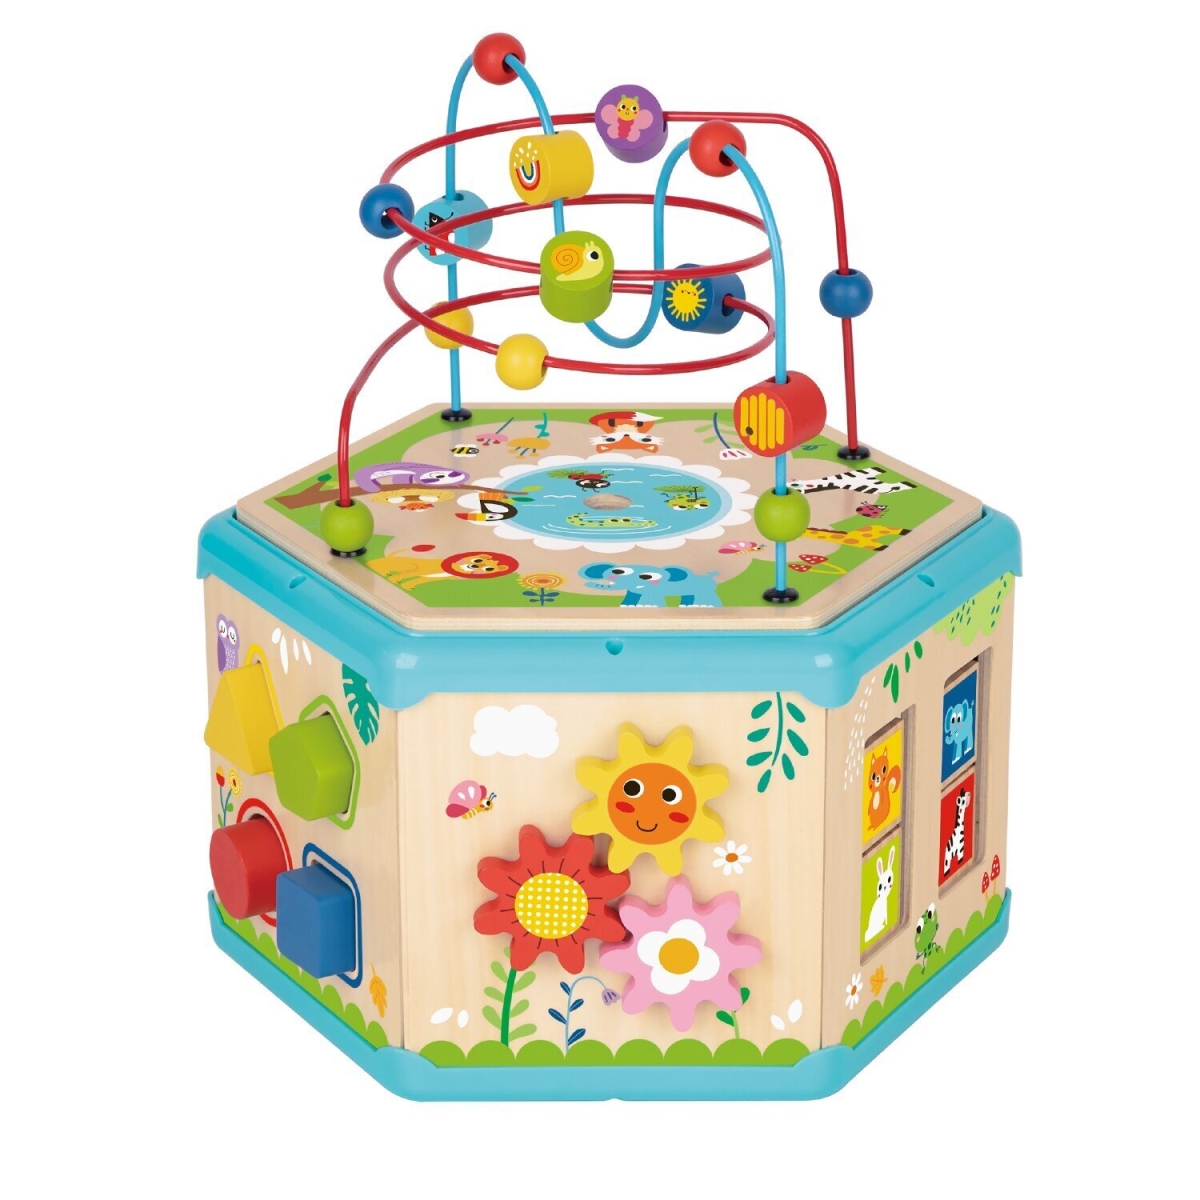 Picture of Tooky Toy 300329 31 x 28 x 35 cm 7-in-1 Activity Cube